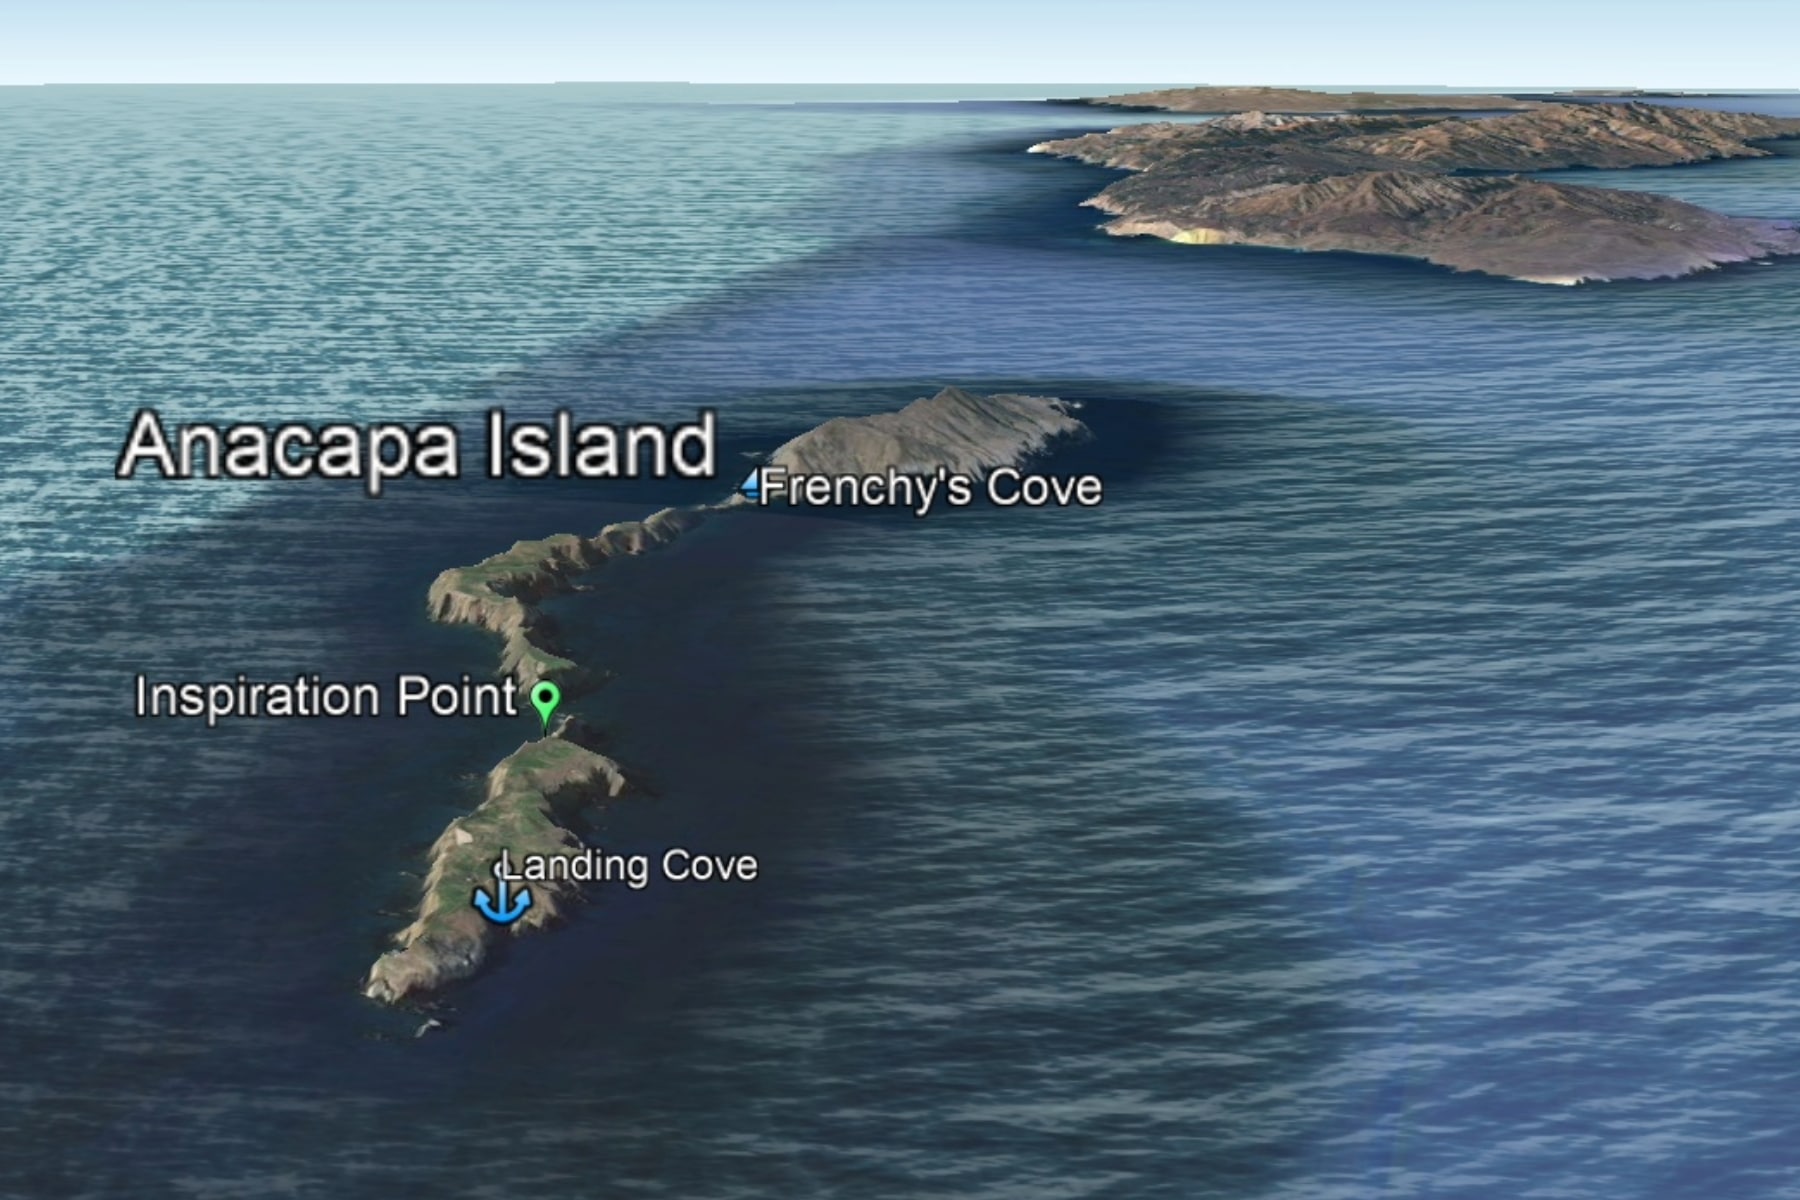 Frenchys Cove Location on West Anacapa Island in Channel Islands National Park